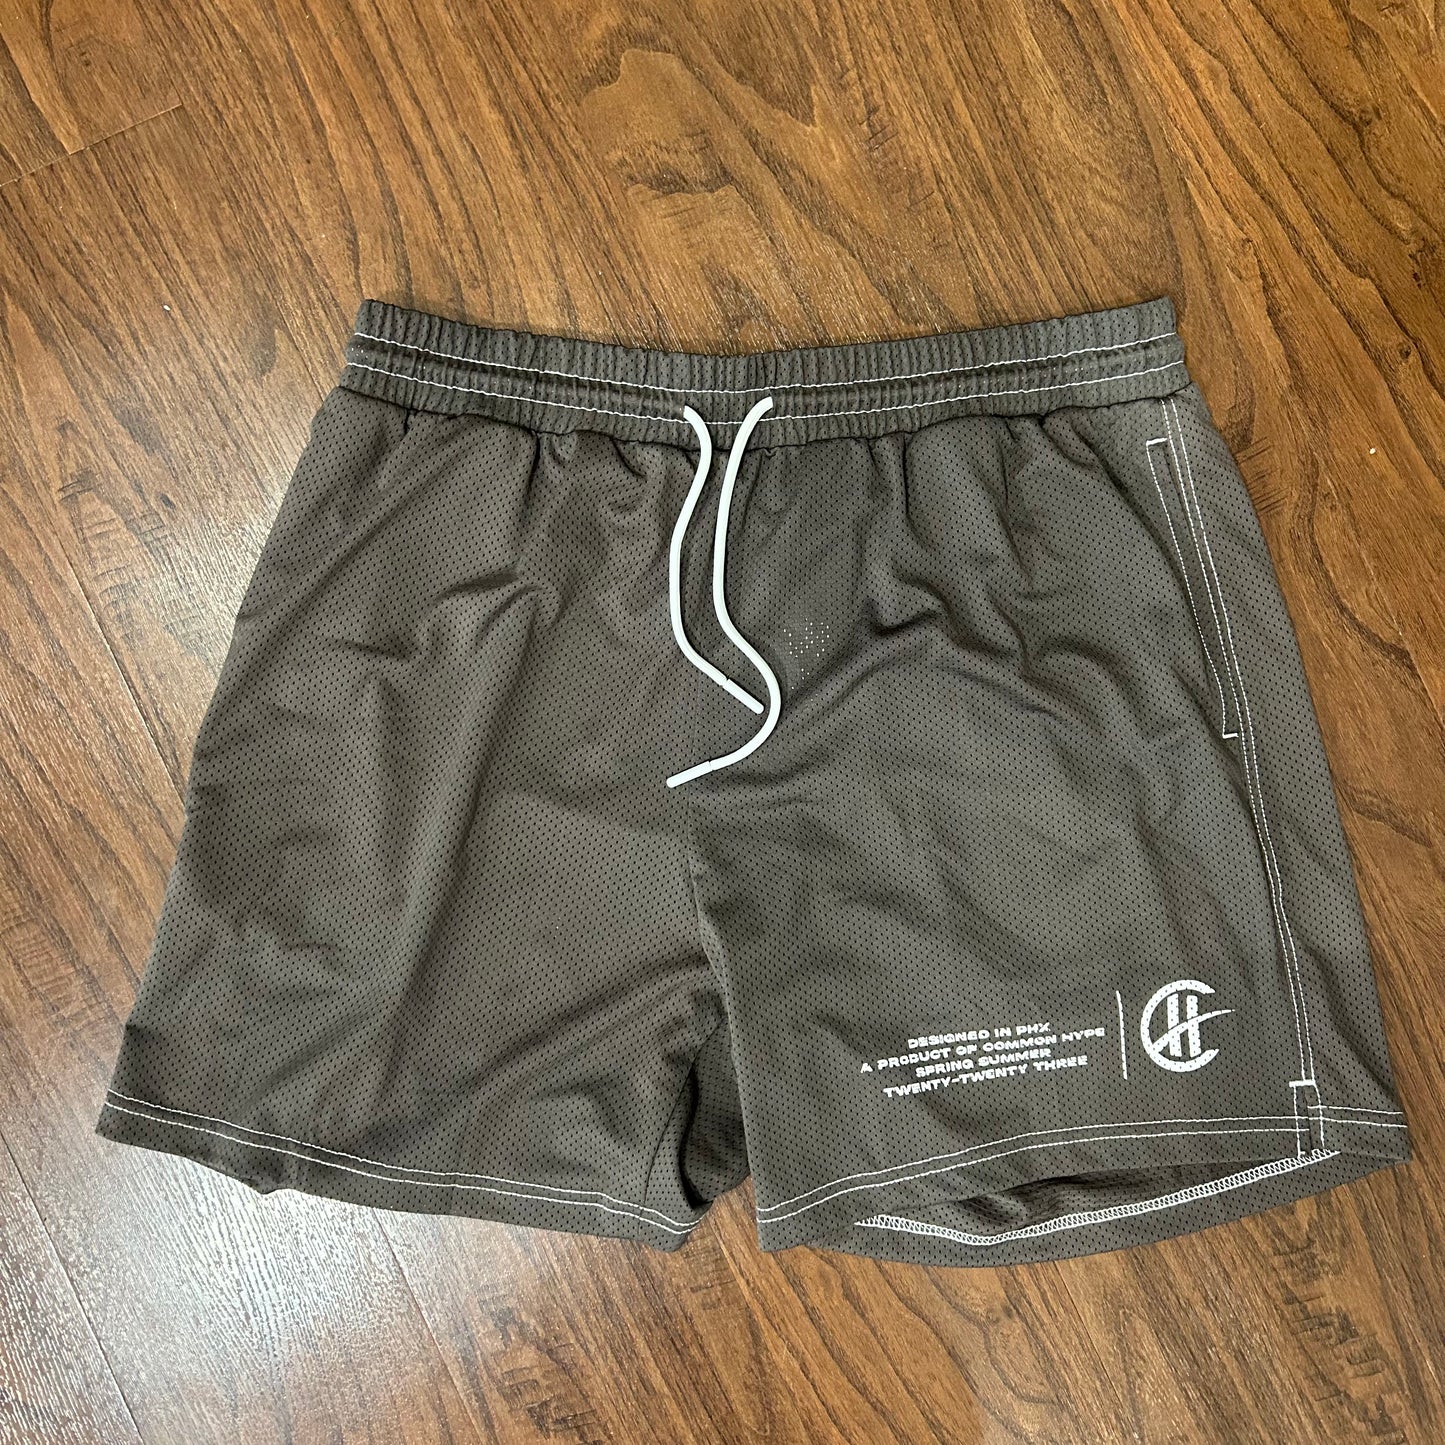 Common Hype Brown Contrast Shorts